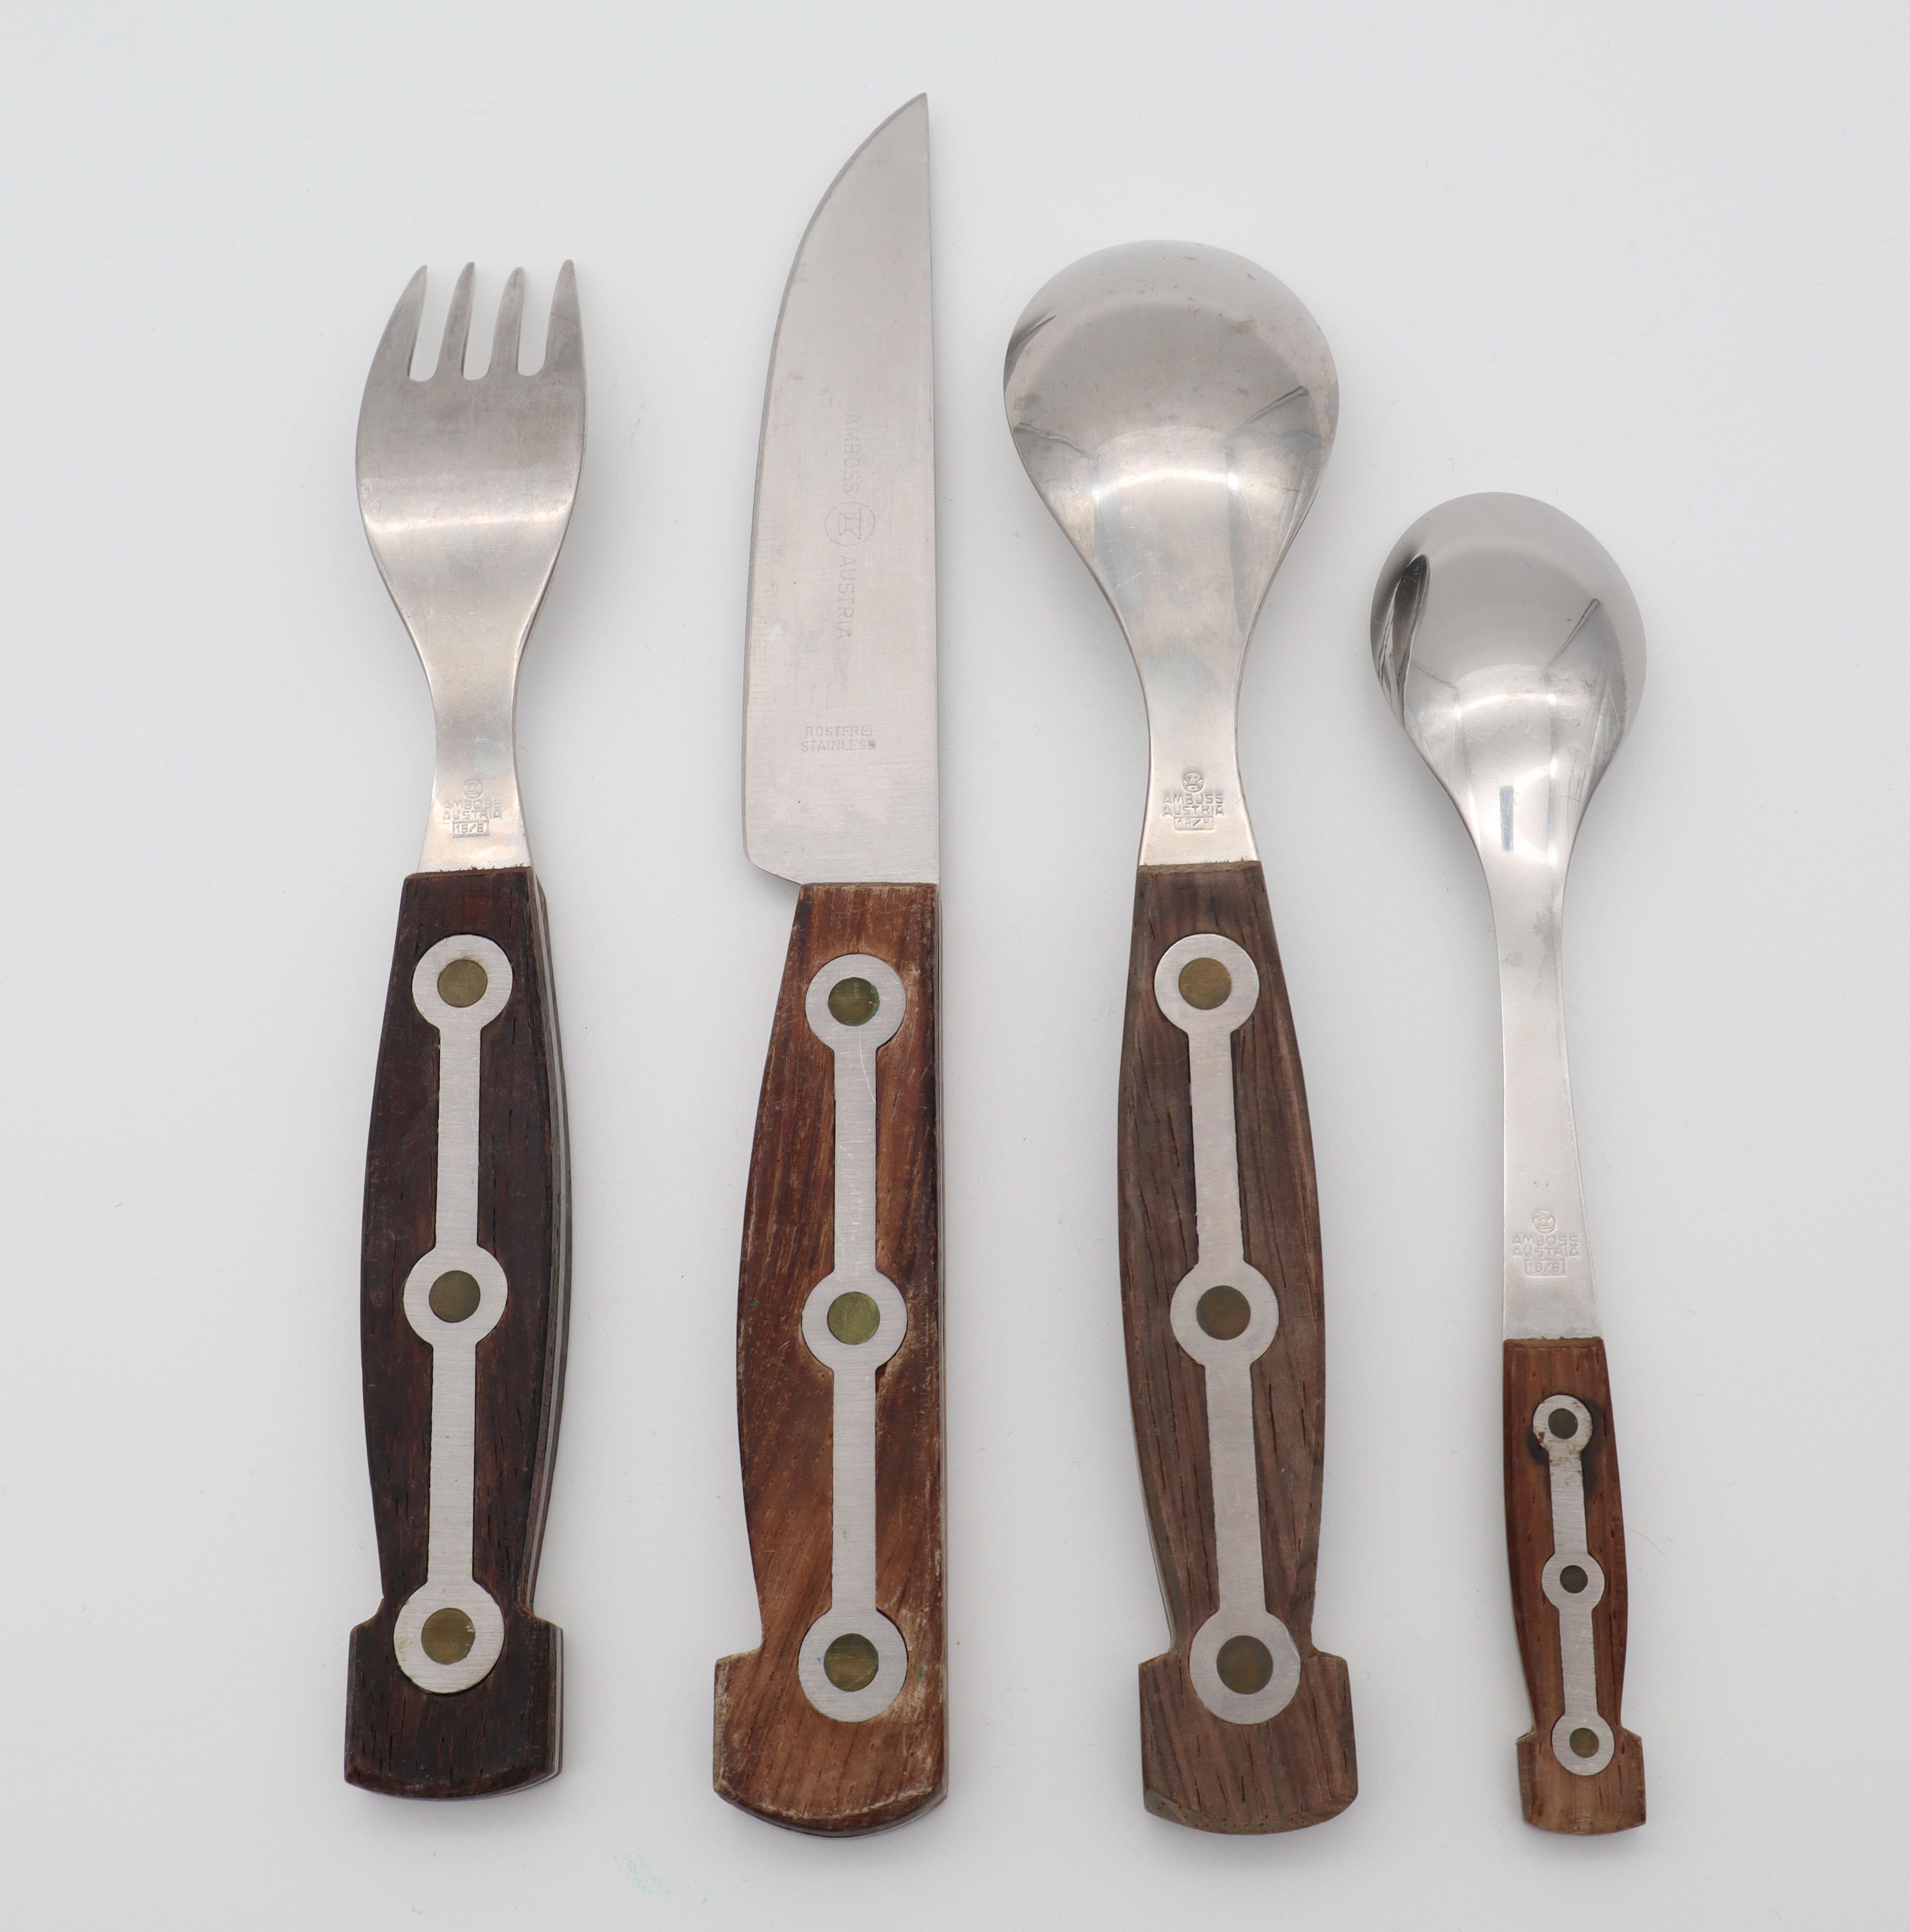 Austrian Cutlery Model 1050 with Wooden Handle from Amboss Austria